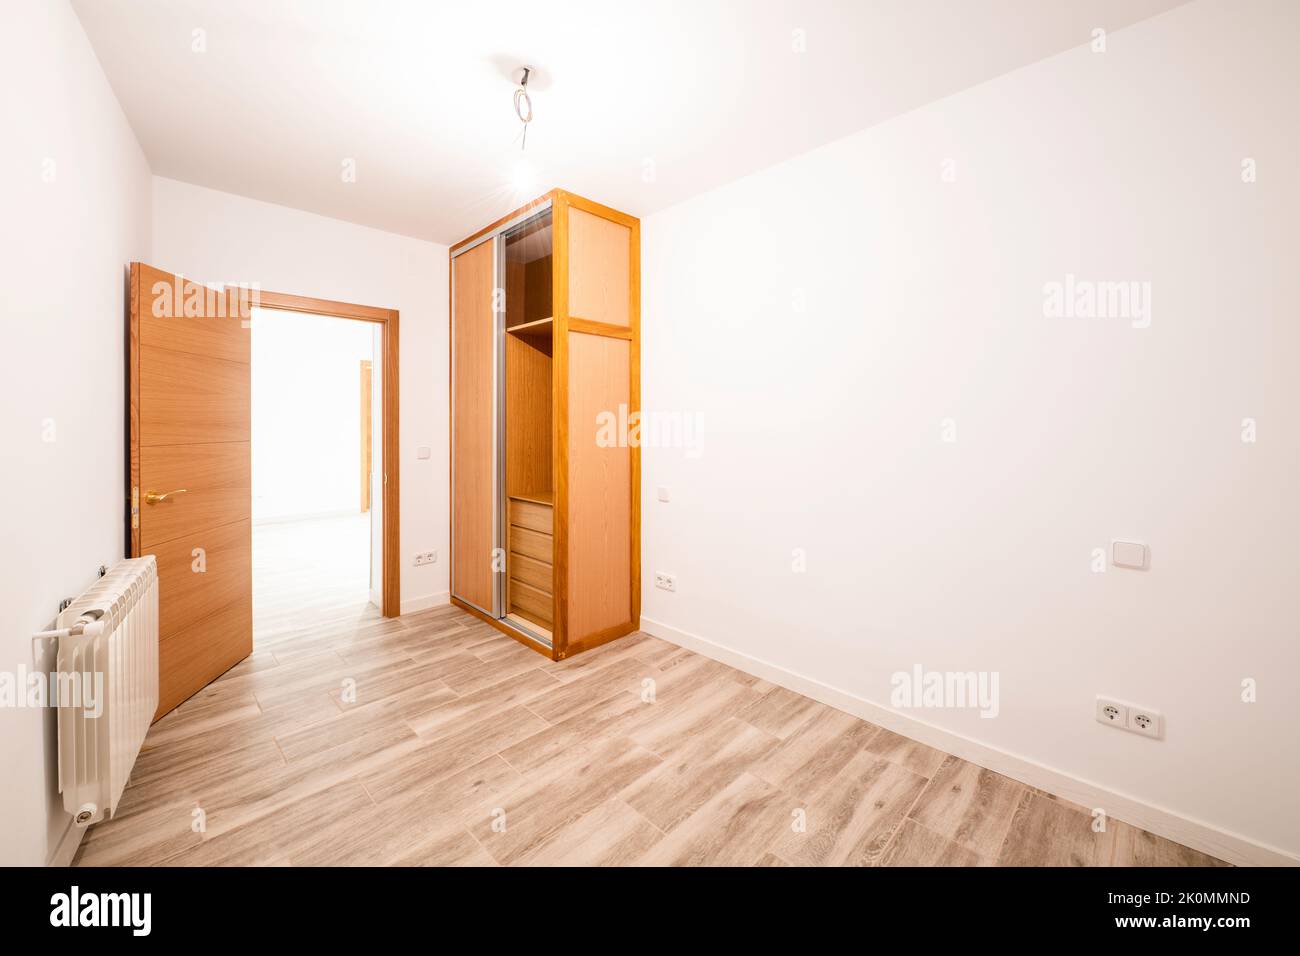 Renovated room with built-in wardrobe with sliding doors in cherry wood color, interior chest of drawers, matching front door and aluminum radiator on Stock Photo